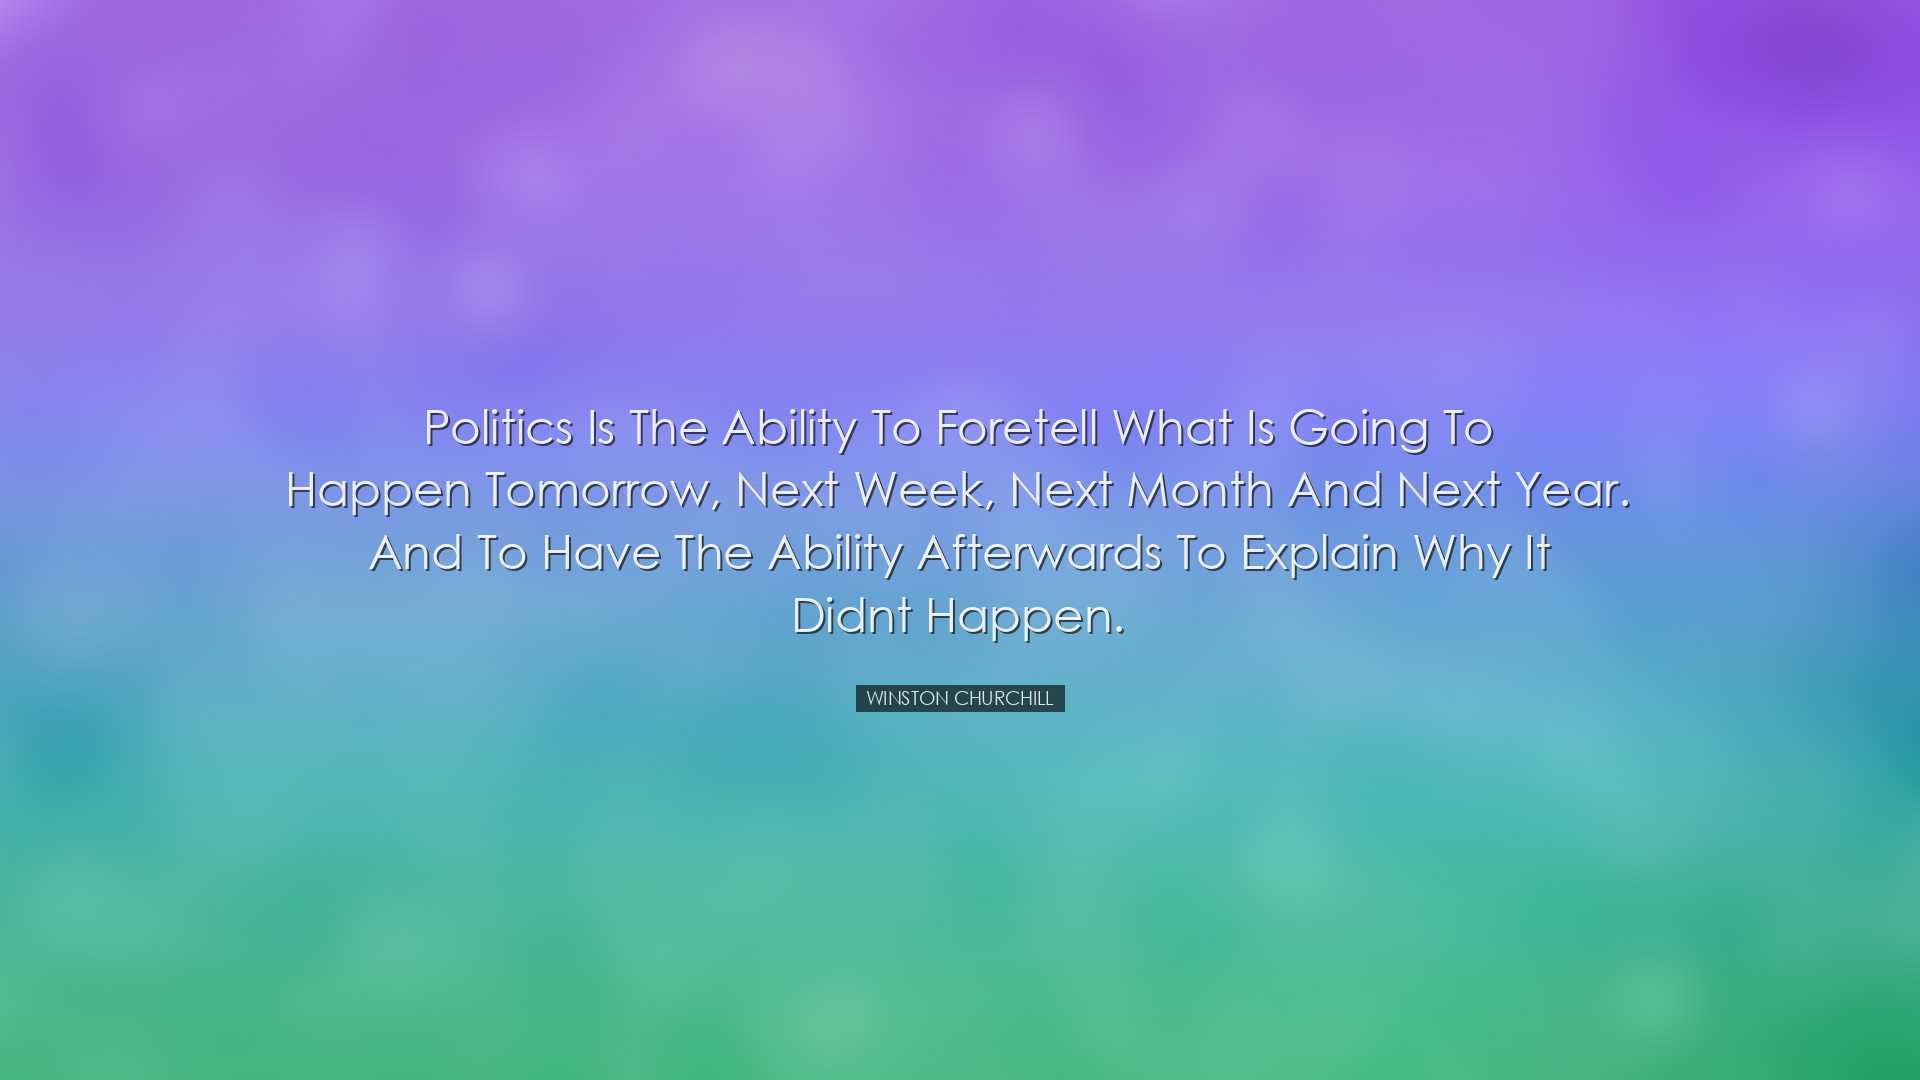 Politics is the ability to foretell what is going to happen tomorr